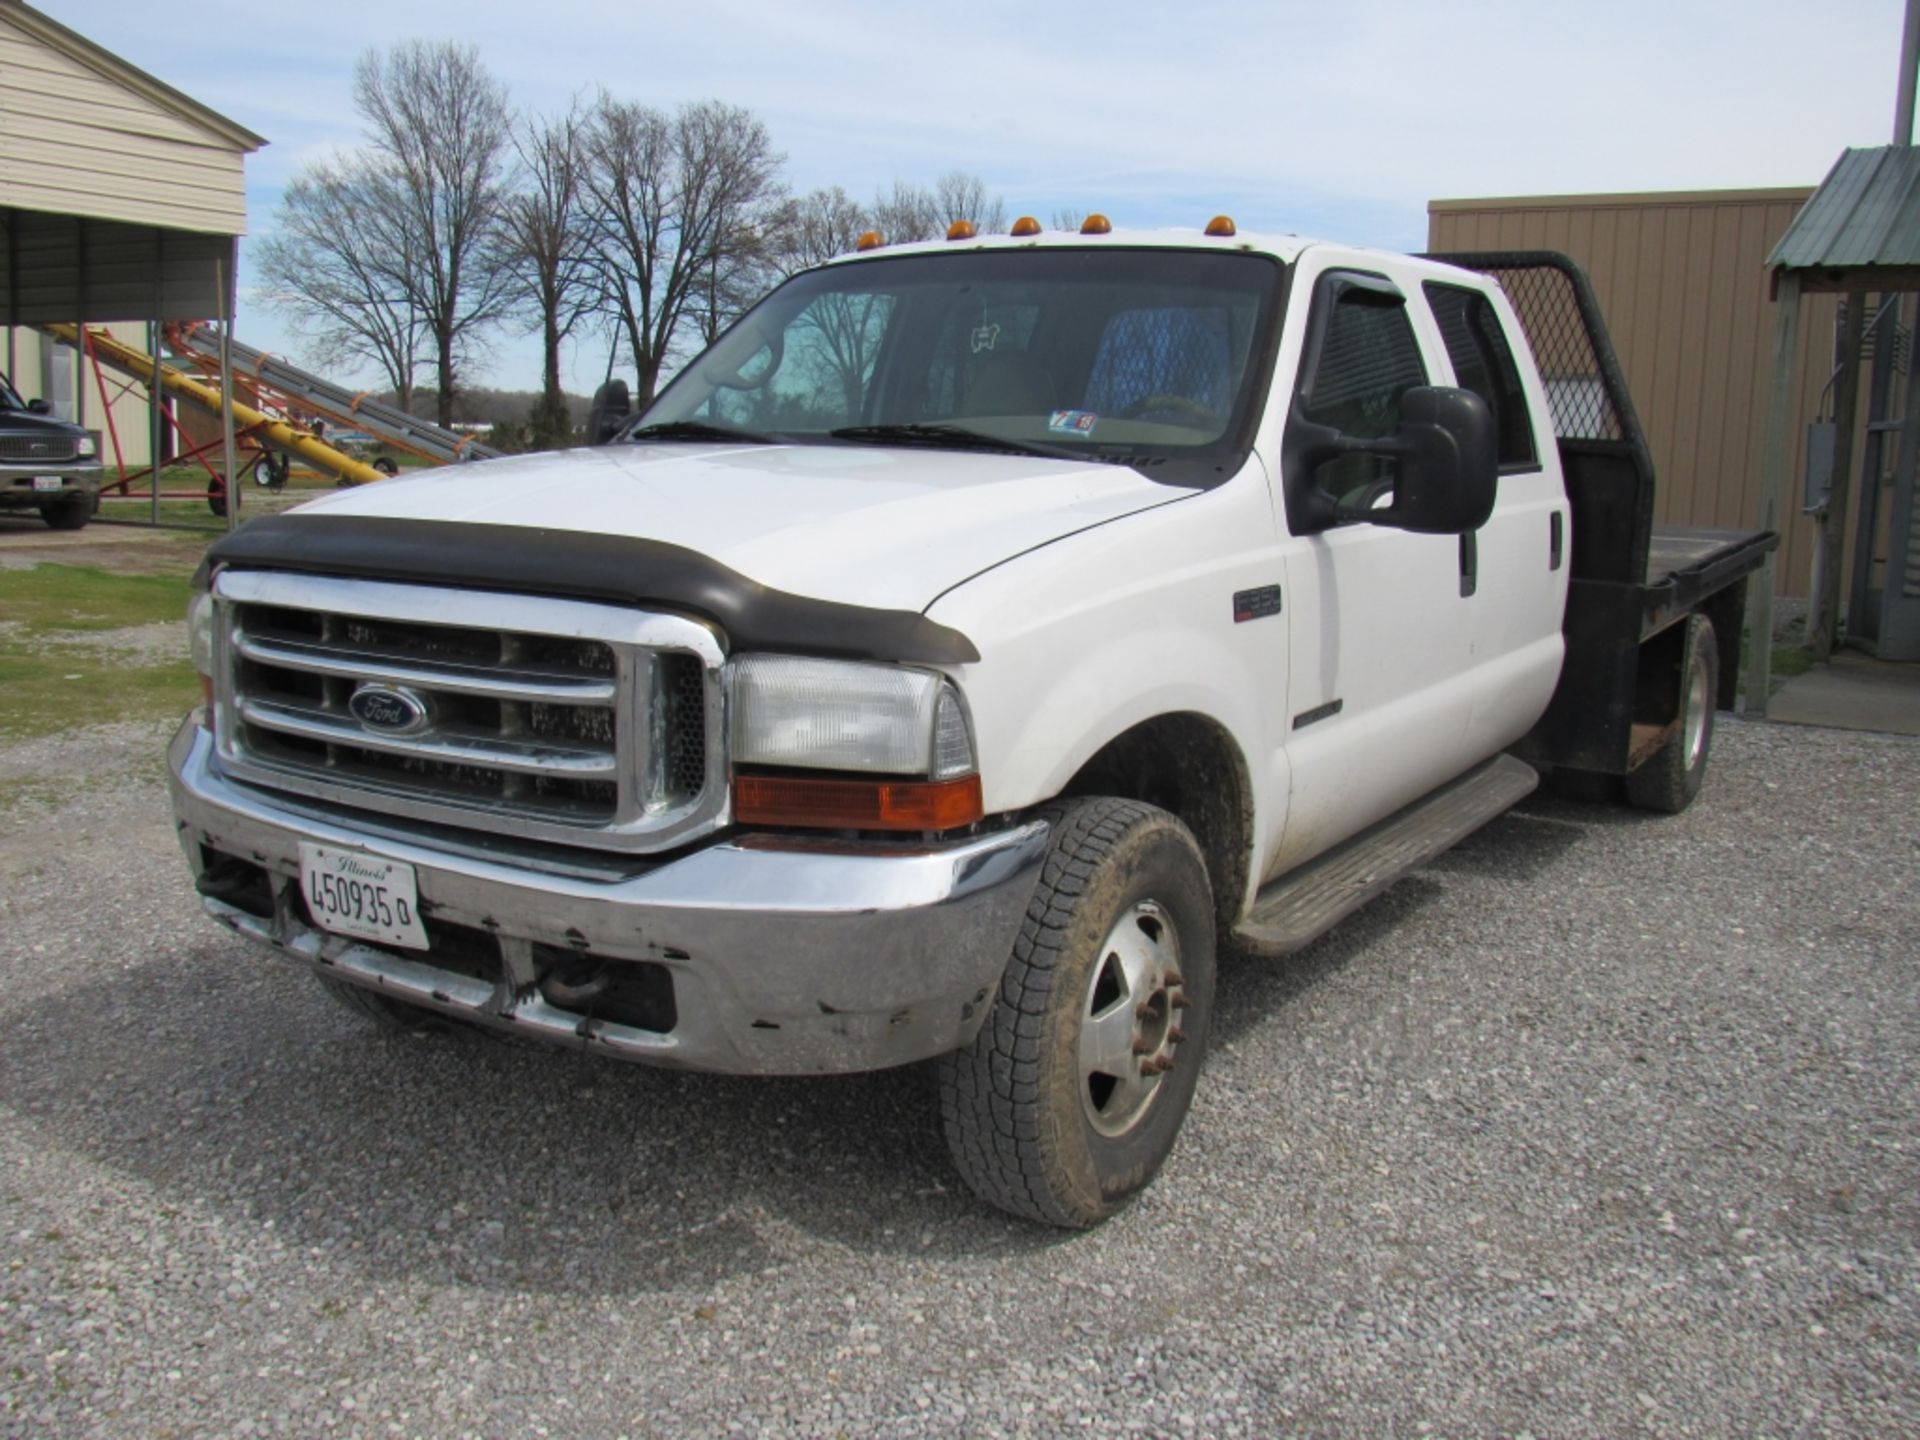 2001 Ford F350 Lariat Flatbed 4wd 7.3 L Powerstroke Diesel Engine